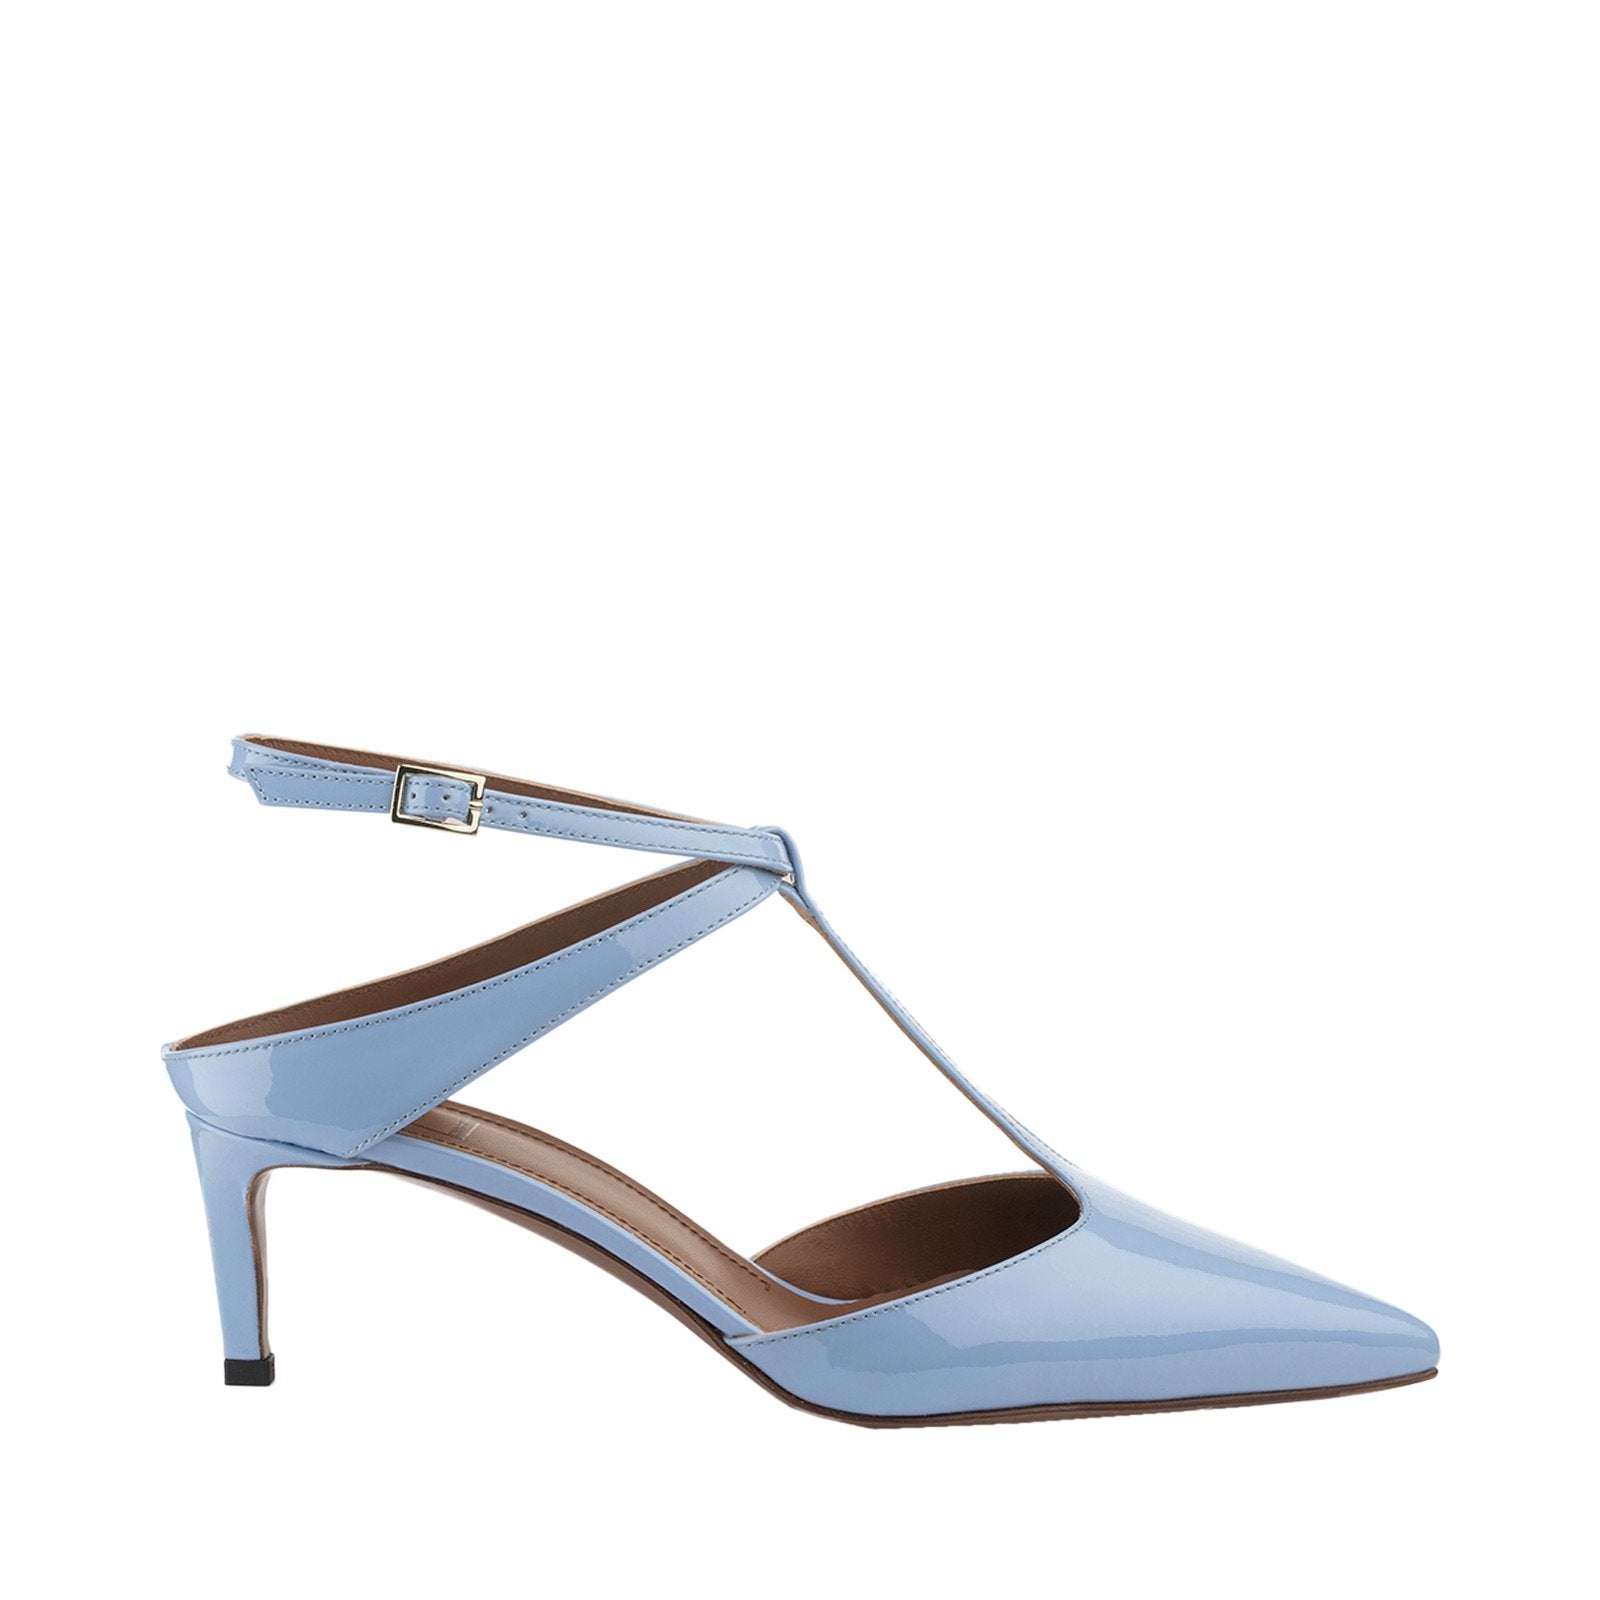 T-Bar Court Shoes In Sky Blue Patent Leather Heels LDL052.55CP00417093 - 1